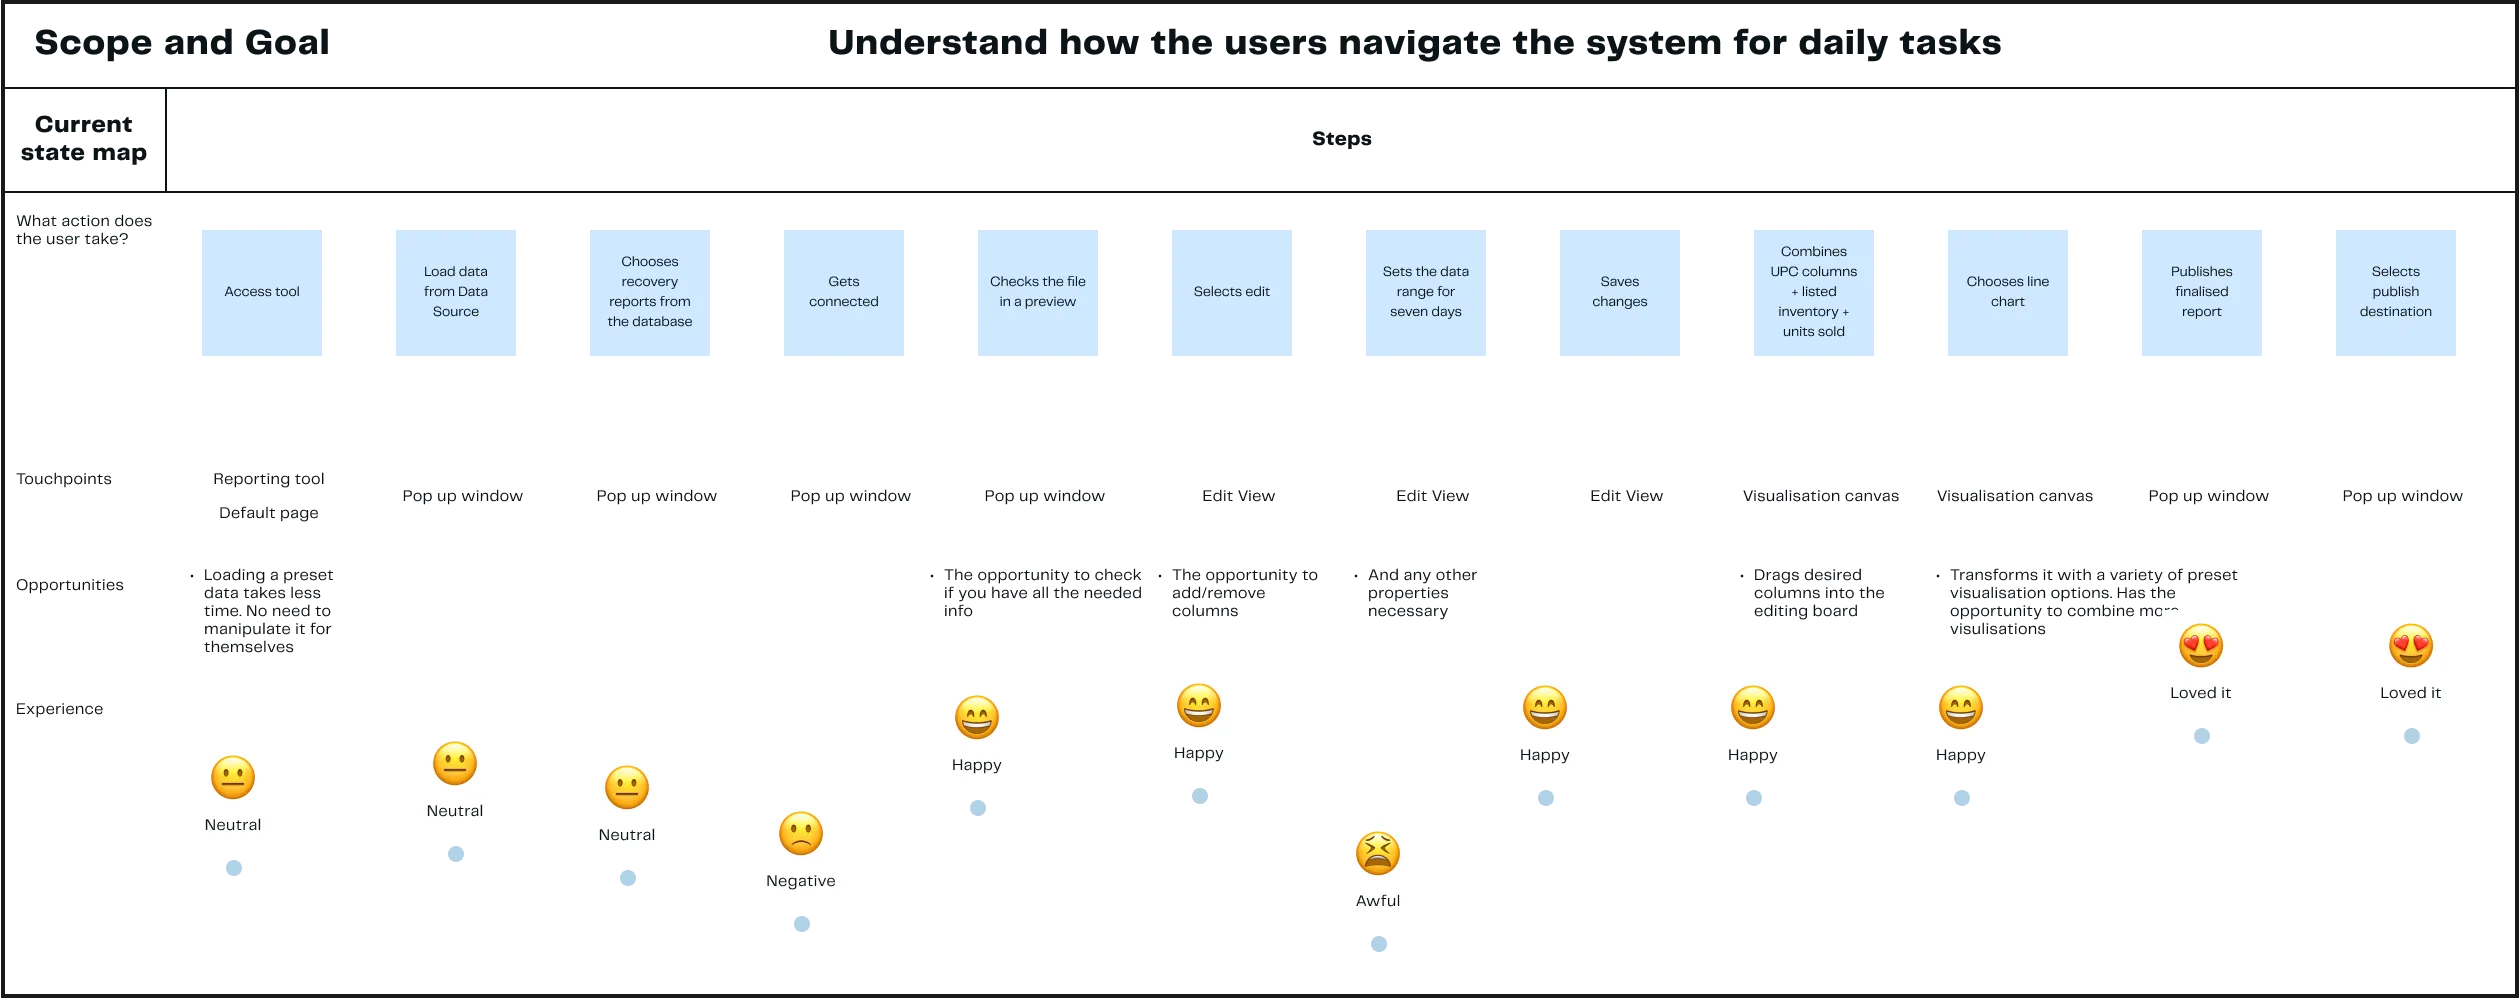 A user journey map for understanding how users navigate the system for daily tasks.